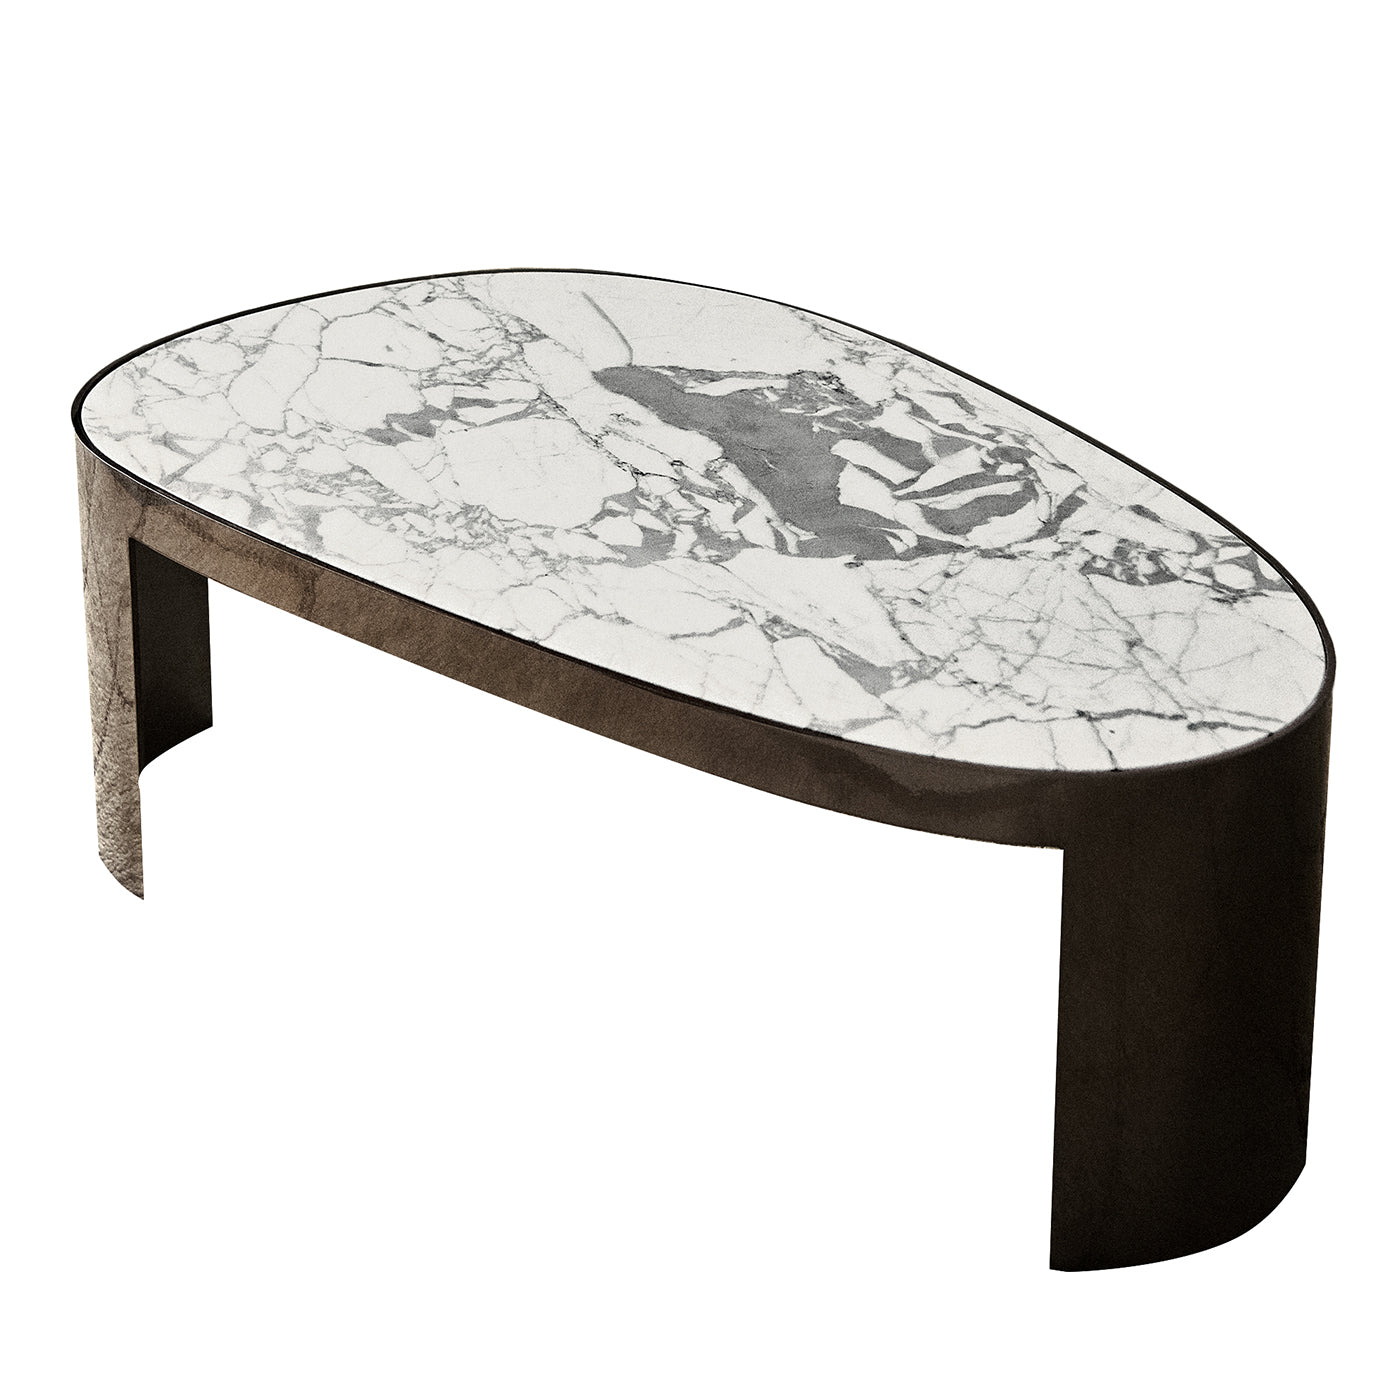 Kyoto White Marble Coffee Table by Ludovica + Roberto Palomba - Main view